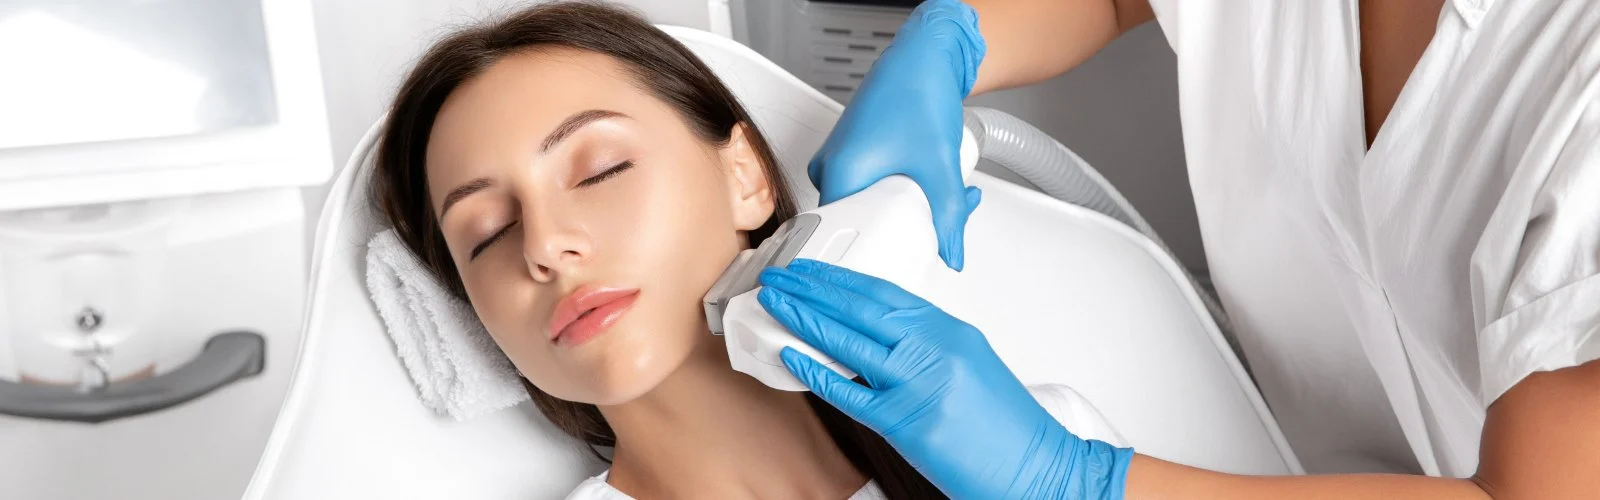 All You Need to Know About Face Laser Treatment